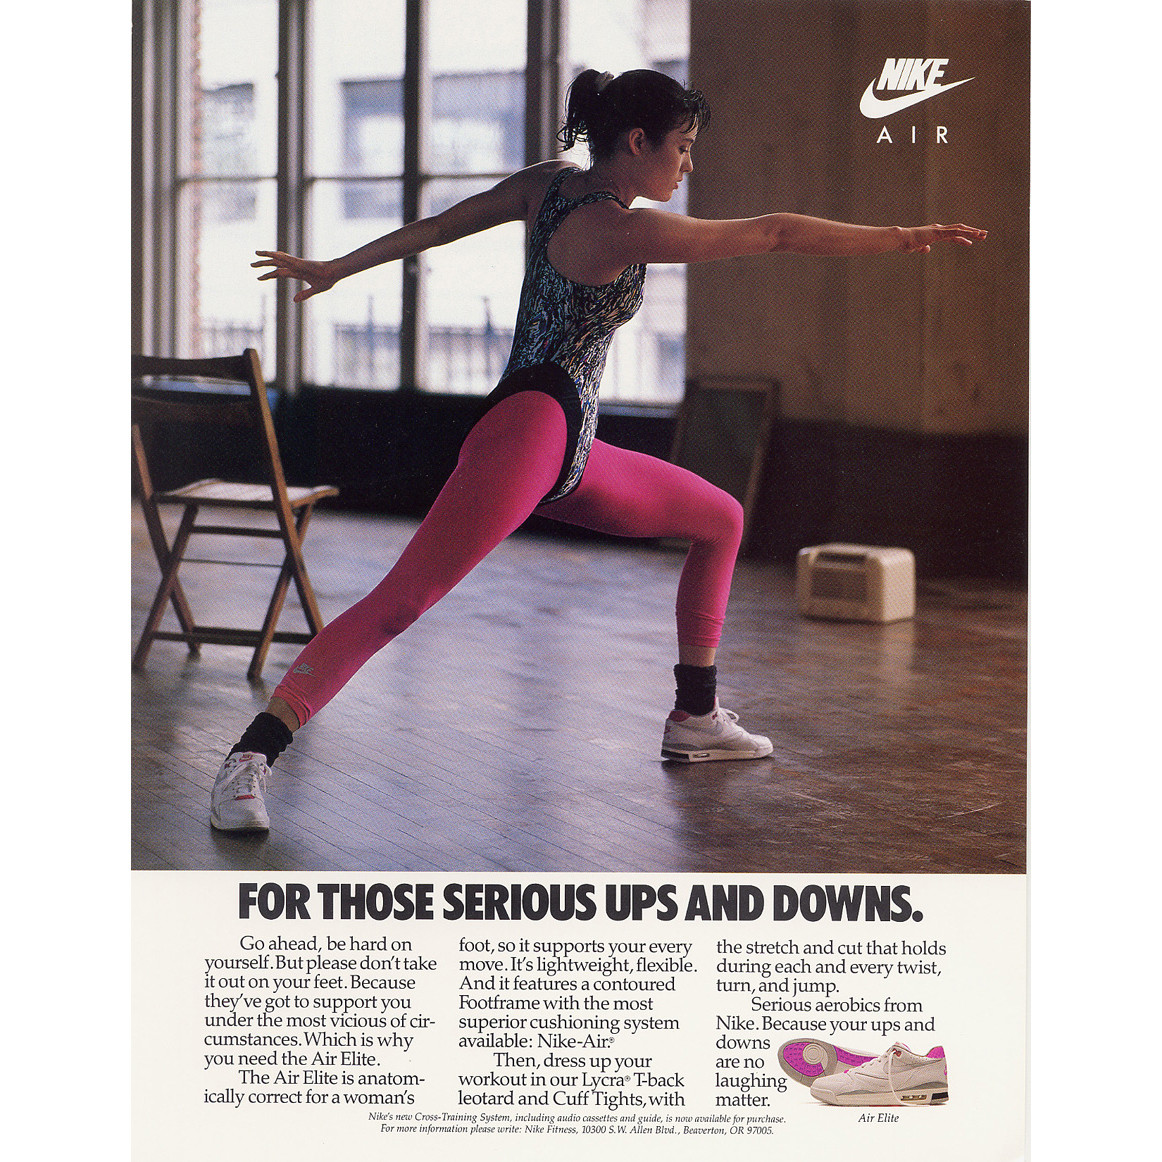 logo compilar de repuesto Take A Look At These Retro Nike Ads For Women | HuffPost Sports